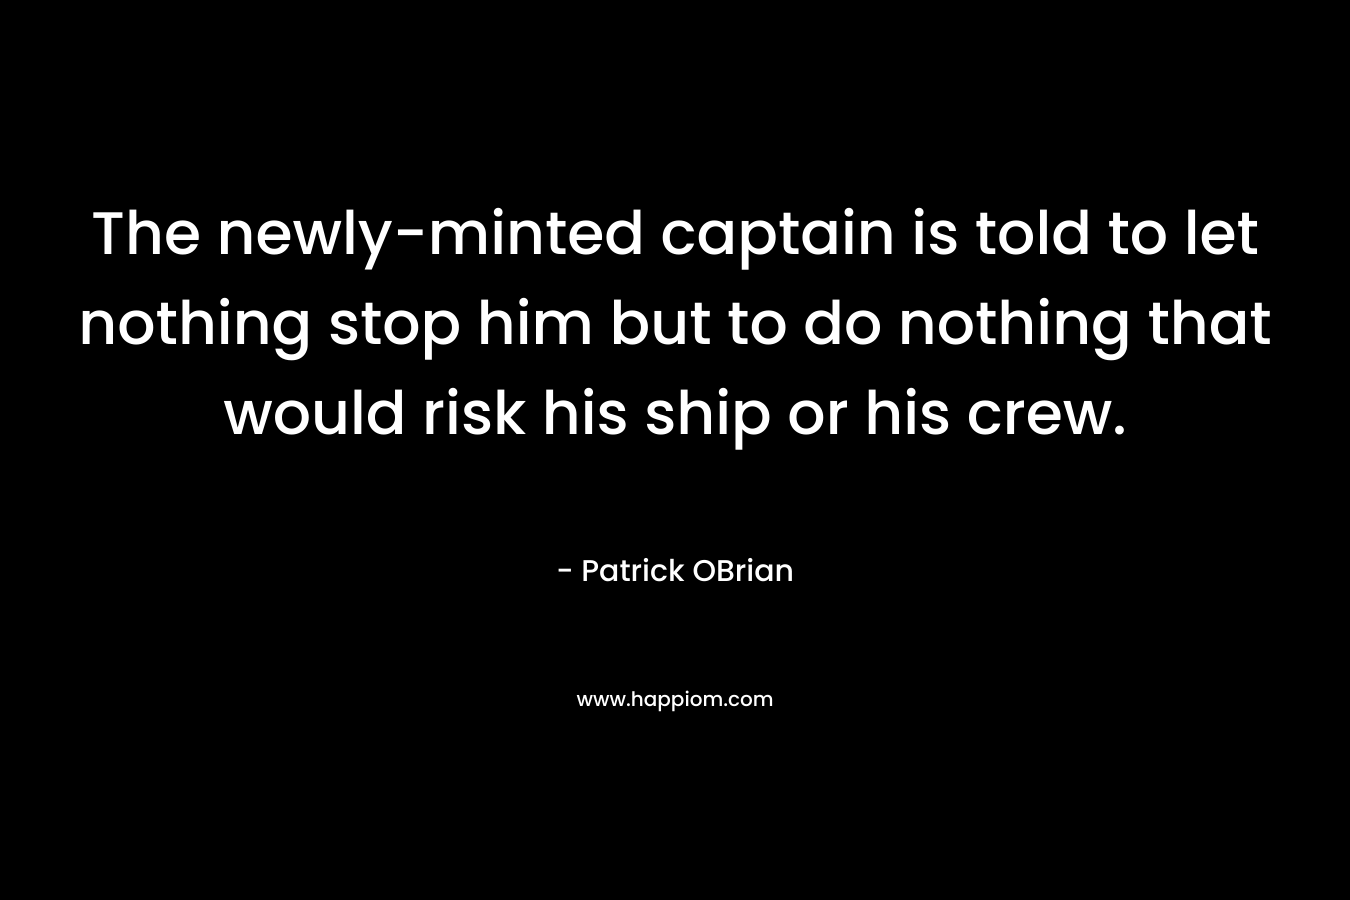 The newly-minted captain is told to let nothing stop him but to do nothing that would risk his ship or his crew. – Patrick OBrian